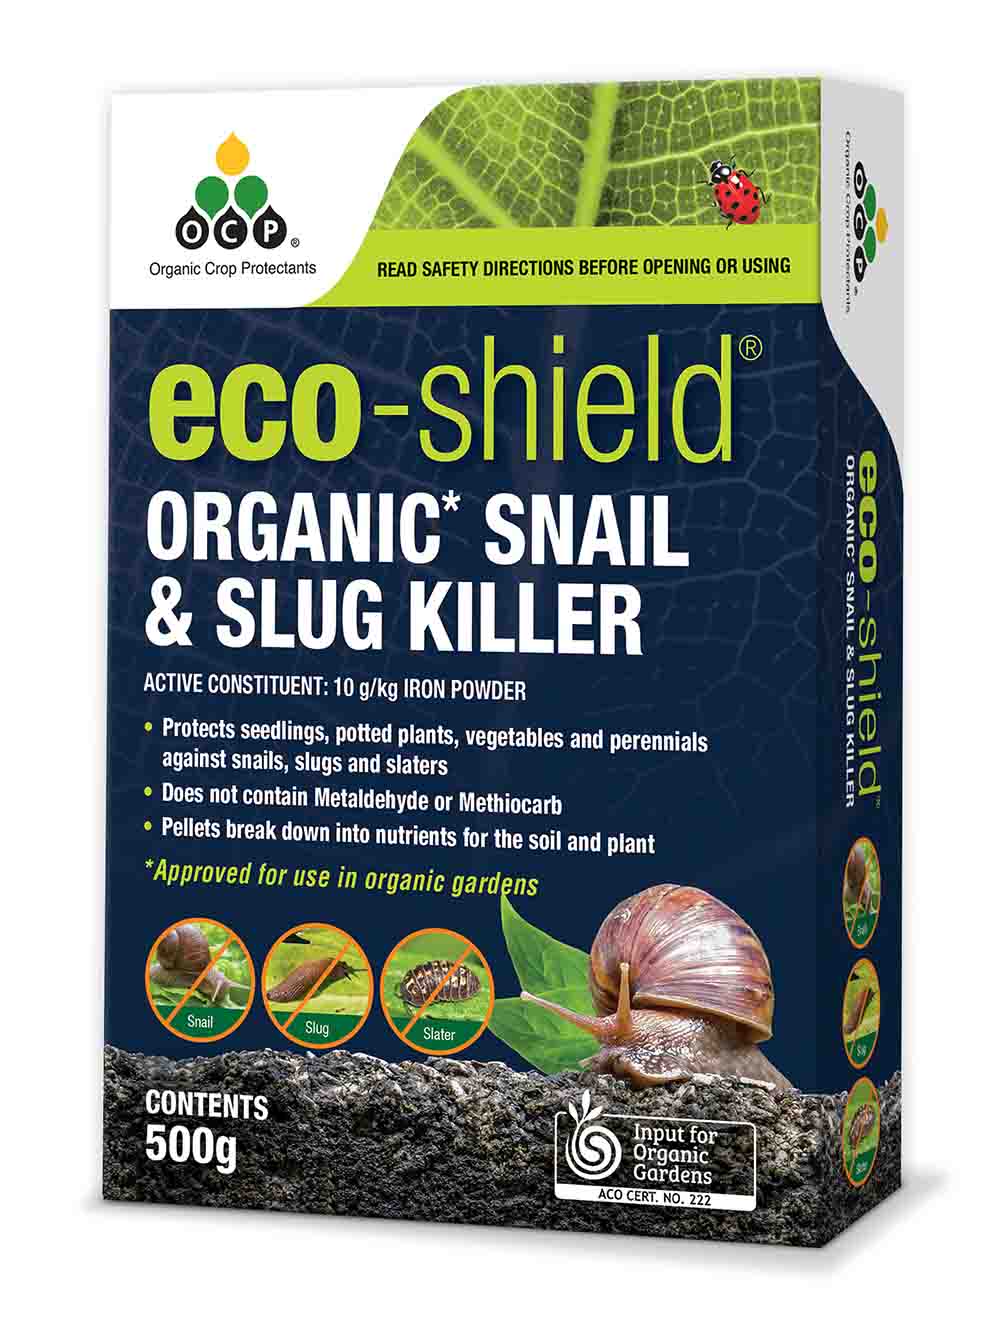 Use OCP eco-shield organic pellets for an effective way to control snails and slugs